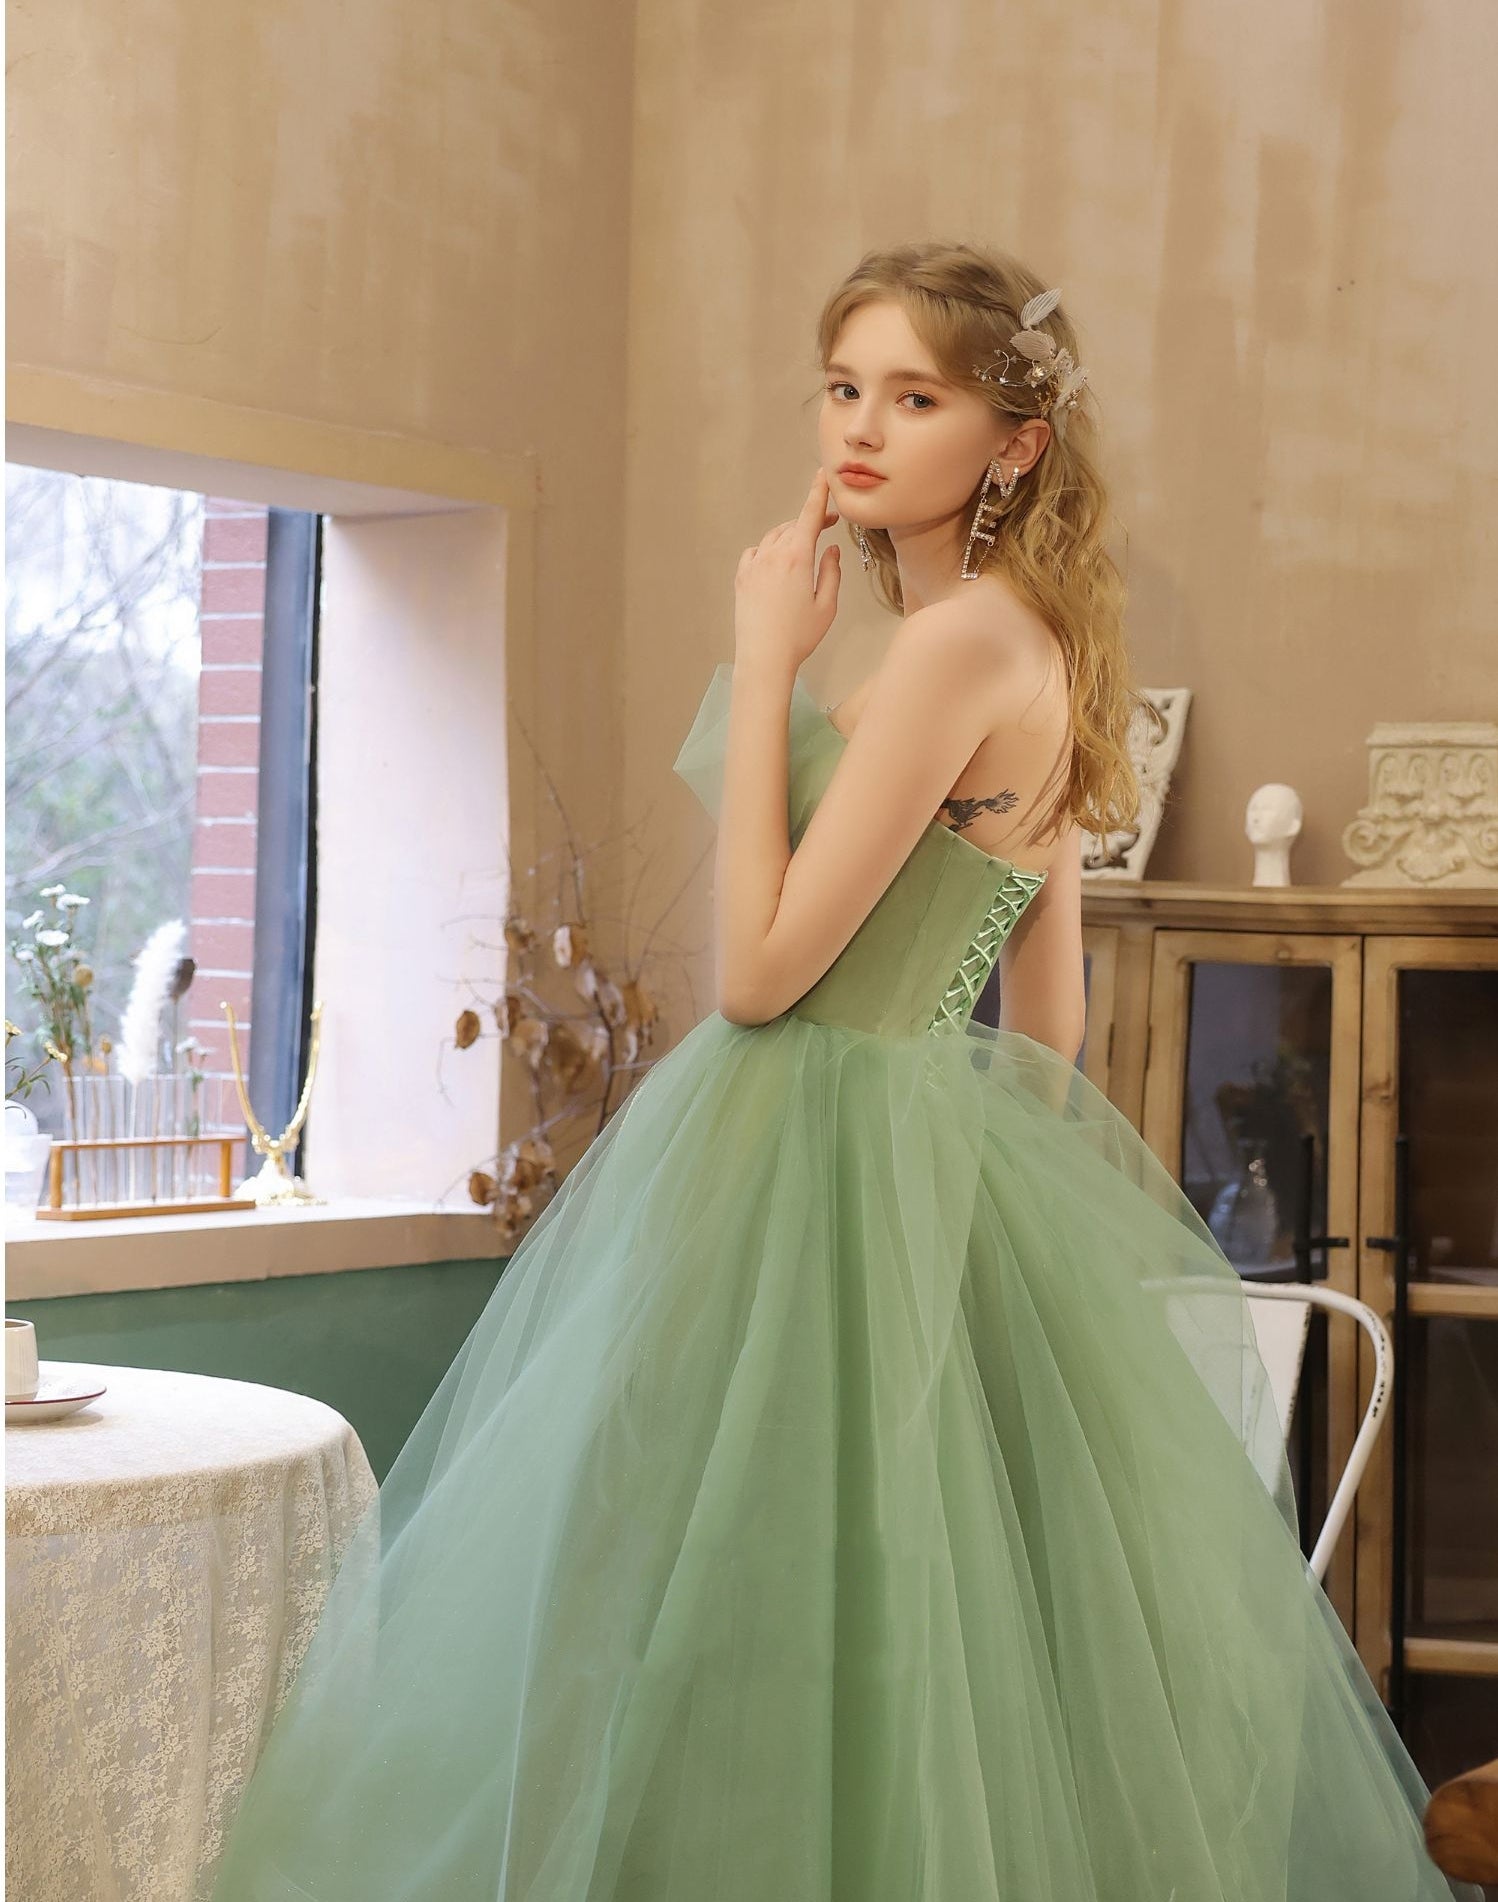 Sweetheart Long Green Tulle Prom Dresses, A-line Prom Dresses, Lovely Newest 2021 Prom Dresses